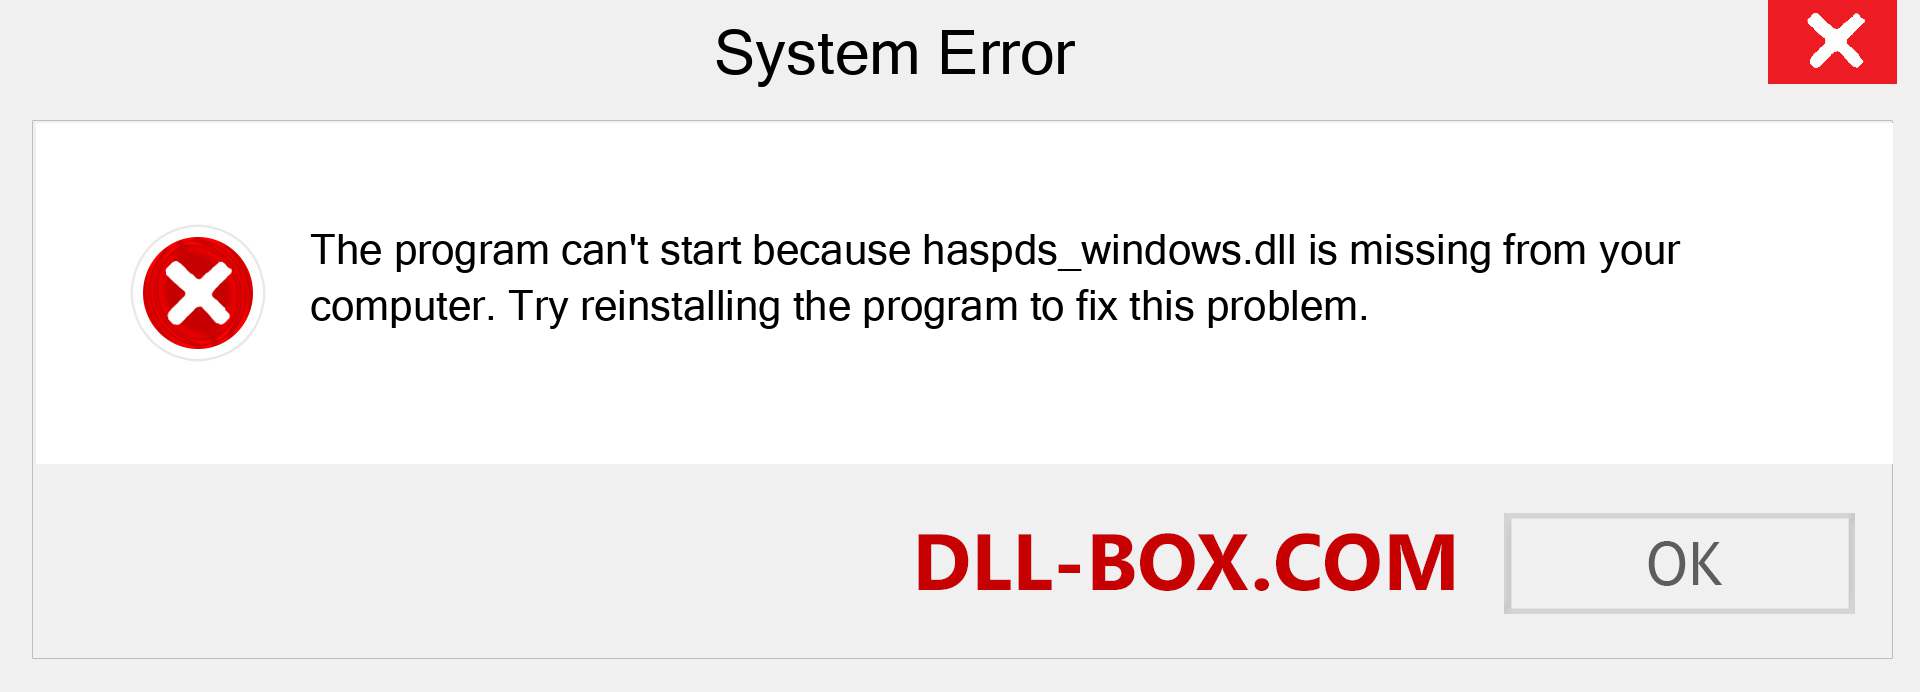  haspds_windows.dll file is missing?. Download for Windows 7, 8, 10 - Fix  haspds_windows dll Missing Error on Windows, photos, images